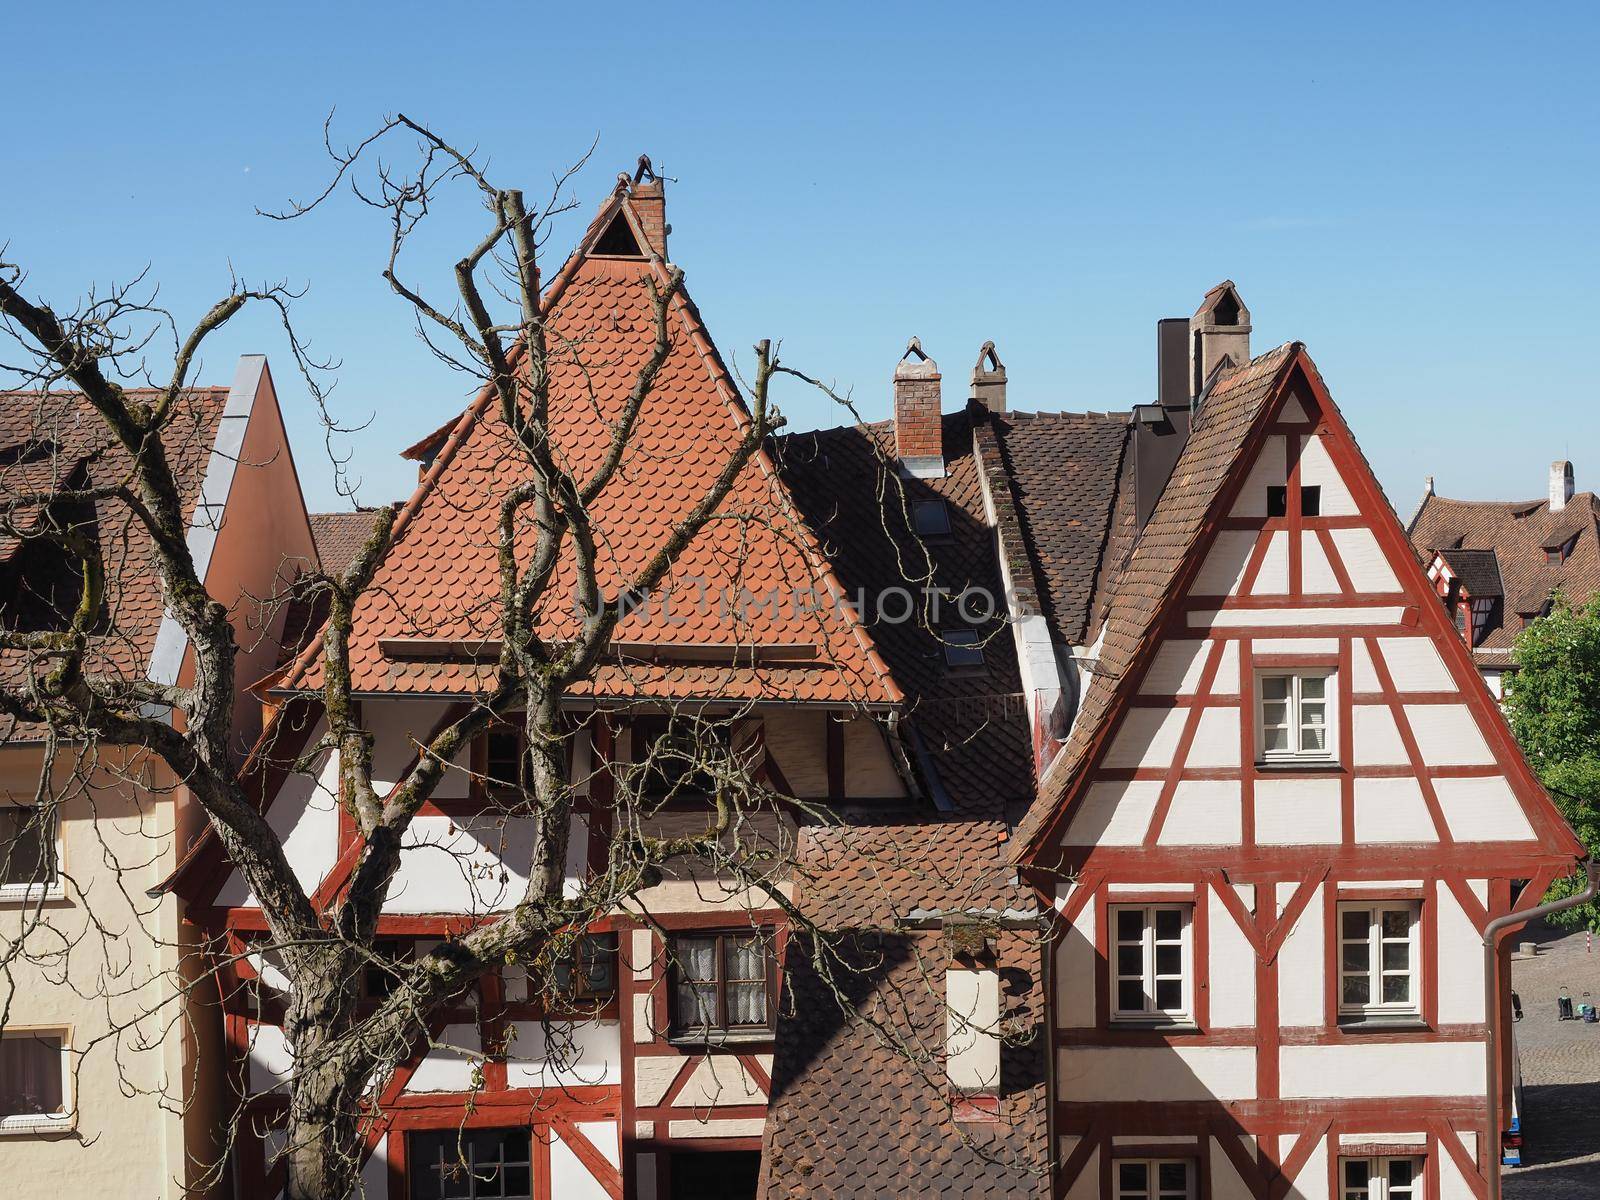 Ancient wooden frame houses in the old city centre in Nuernberg, Germany